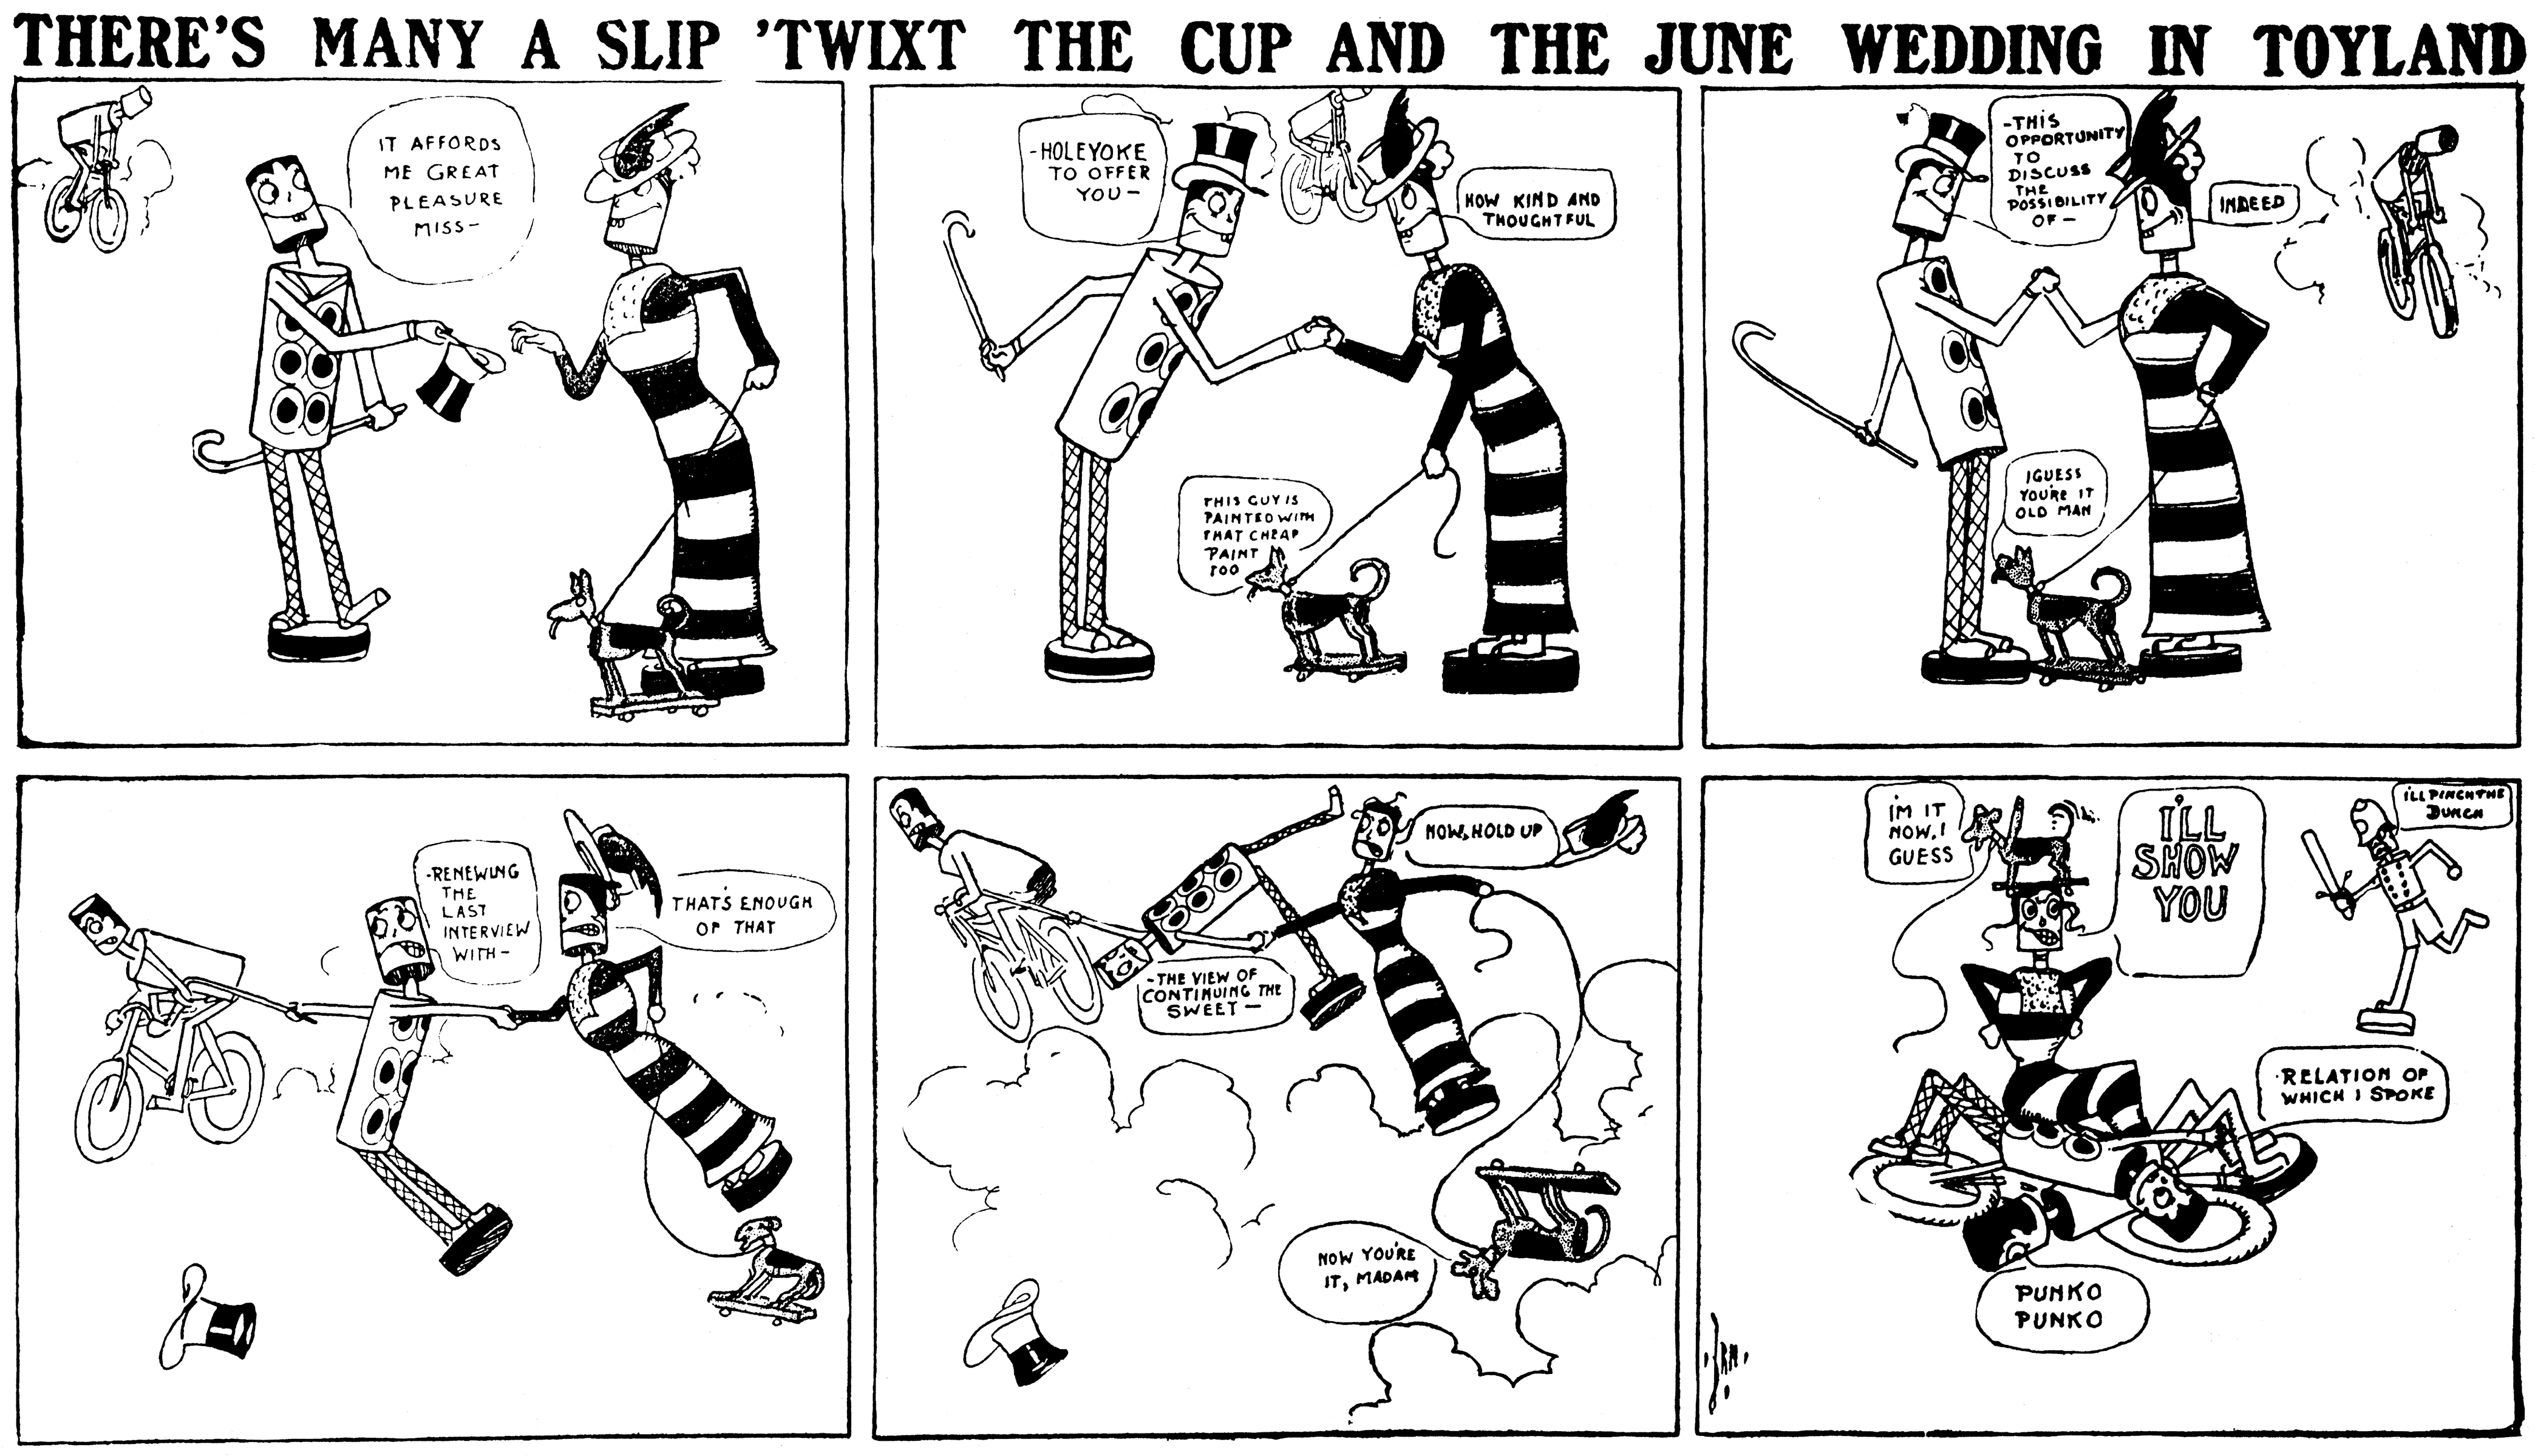 There's Many a Slip 'Twixt the Cup and the June Wedding in Toyland